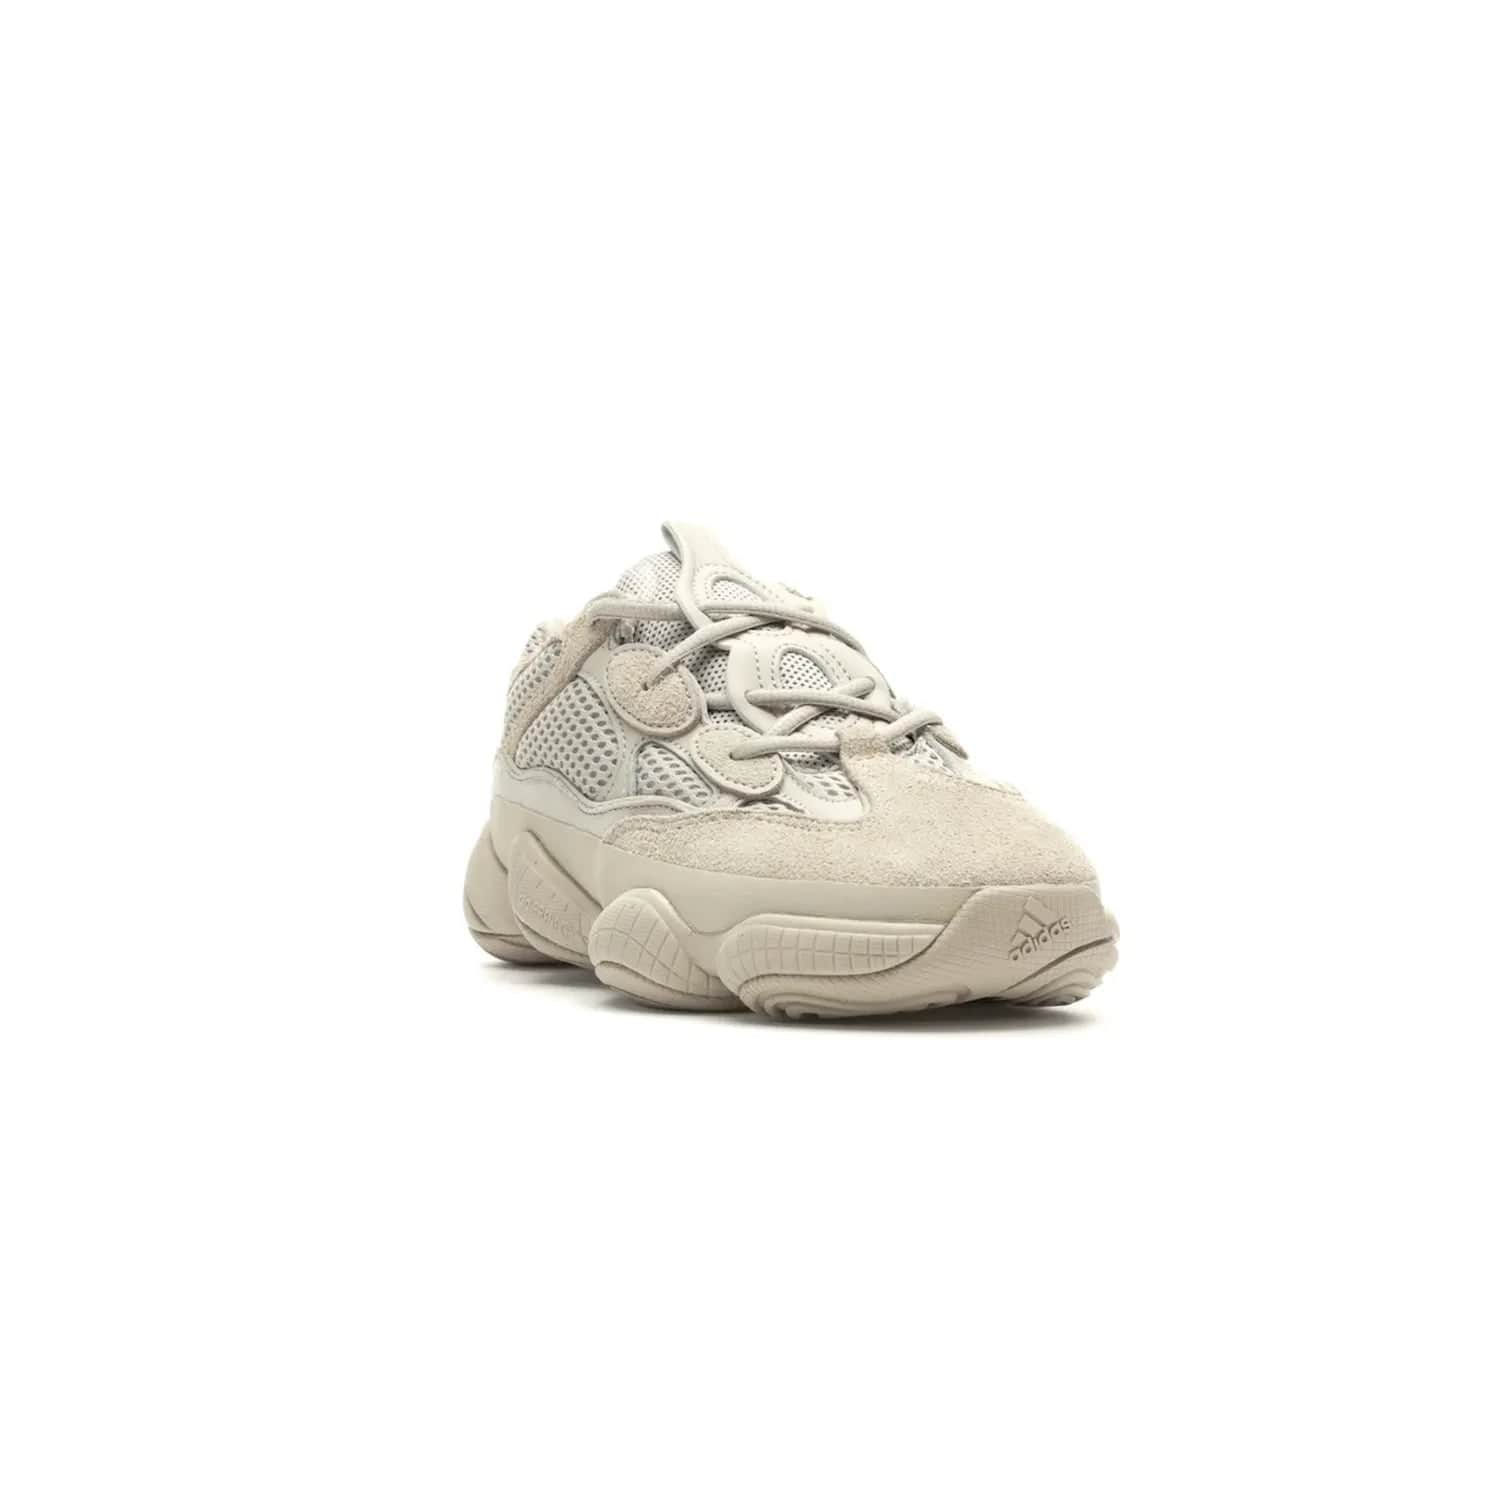 adidas Yeezy 500 Blush - Image 7 - Only at www.BallersClubKickz.com - Step up your sneaker game with the Adidas Yeezy 500 Blush. Monochromatic pale pink palette, hiking-inspired suede/mesh construction, plus adiPRENE sole for comfort and performance. Get the Adidas Yeezy 500 and experience true style and comfort.